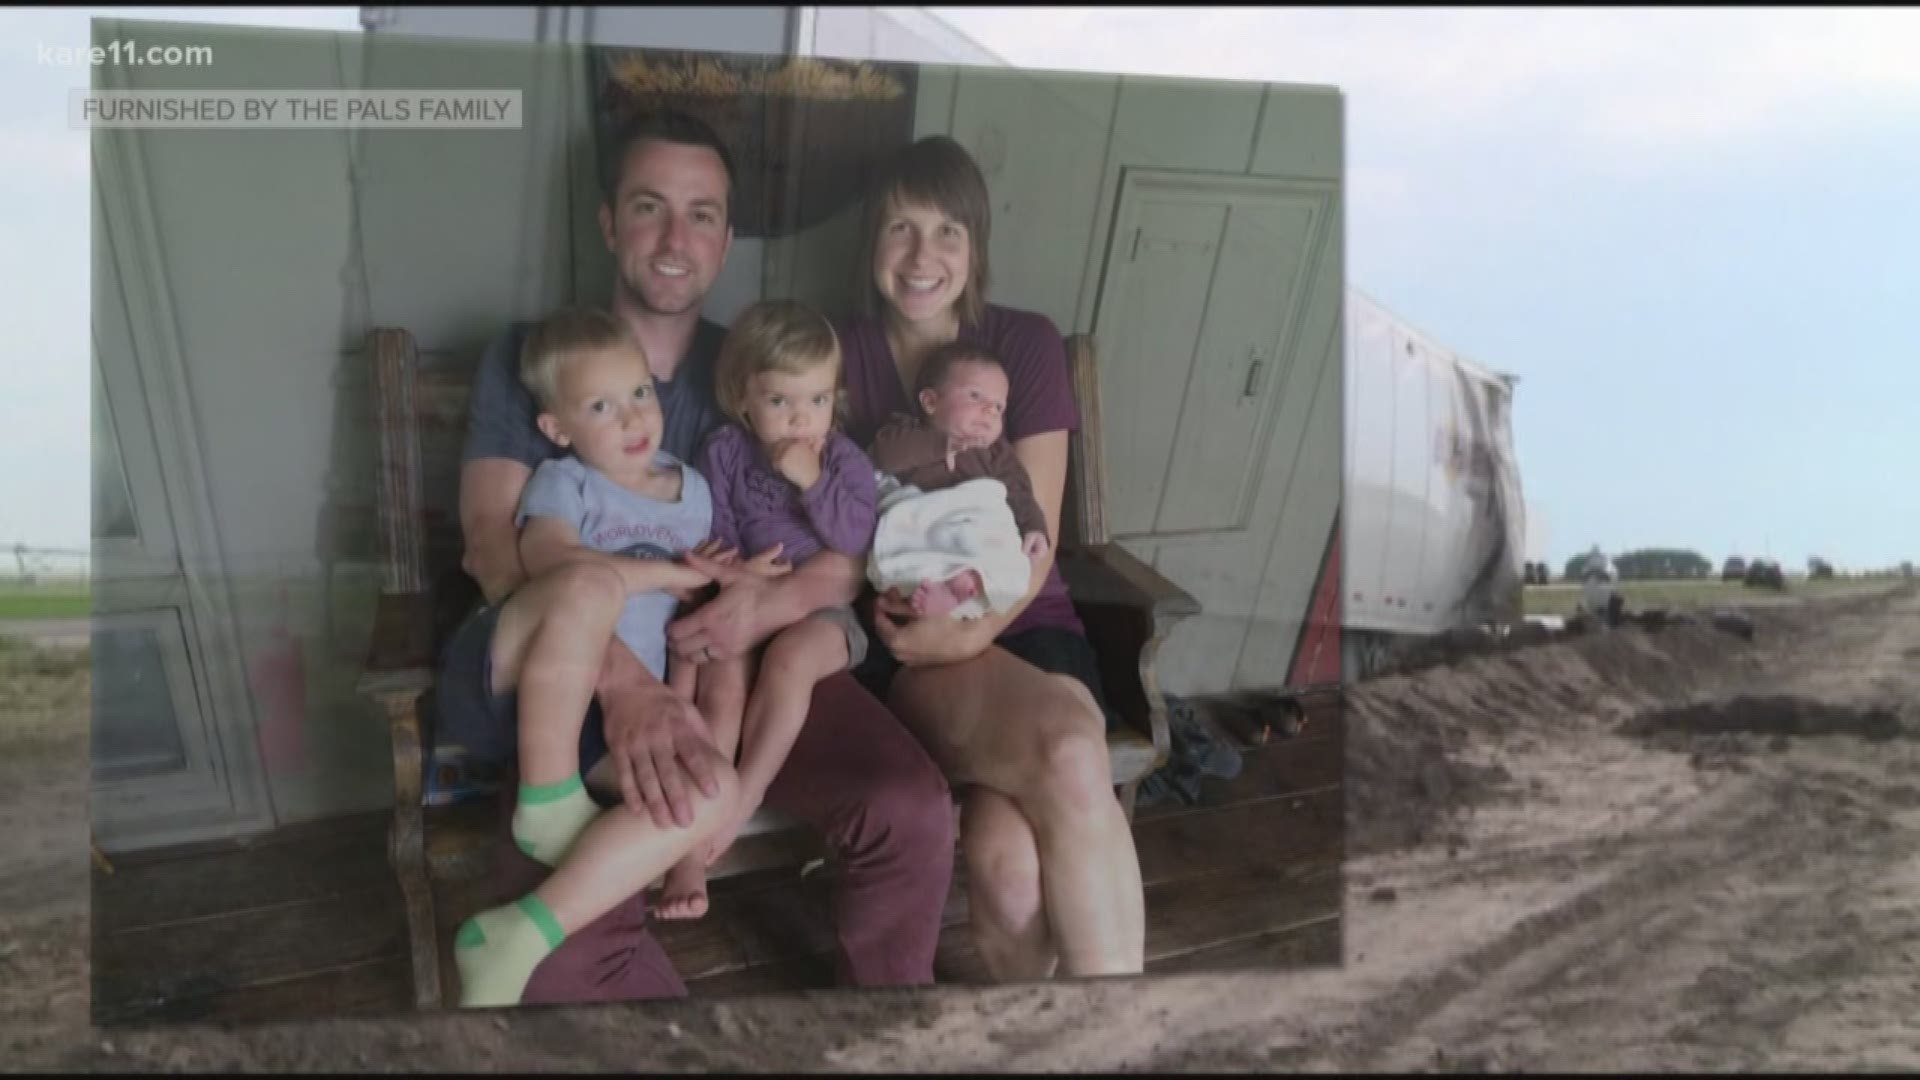 A truck driver will serve a 180-day sentence for a distracted driving crash that killed a Minnesota couple and their three children. You're probably thinking that's a short sentence. And it is - but there's a reason behind it. KARE 11's Kent Erdahl has a 